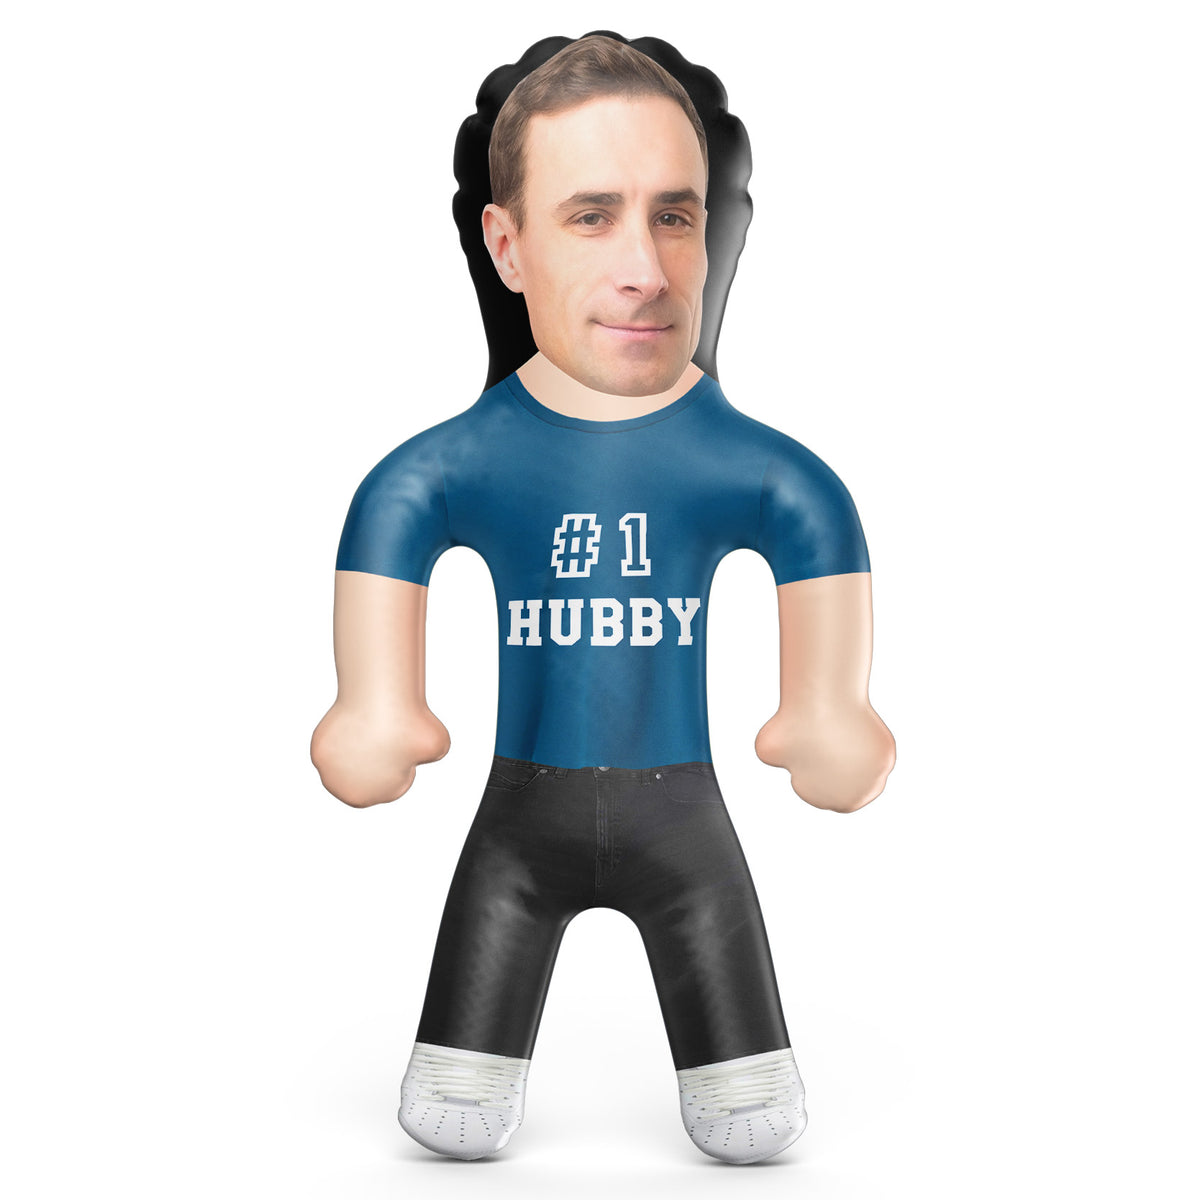 #1 Hubby Inflatable Doll - Husband Blow Up Doll